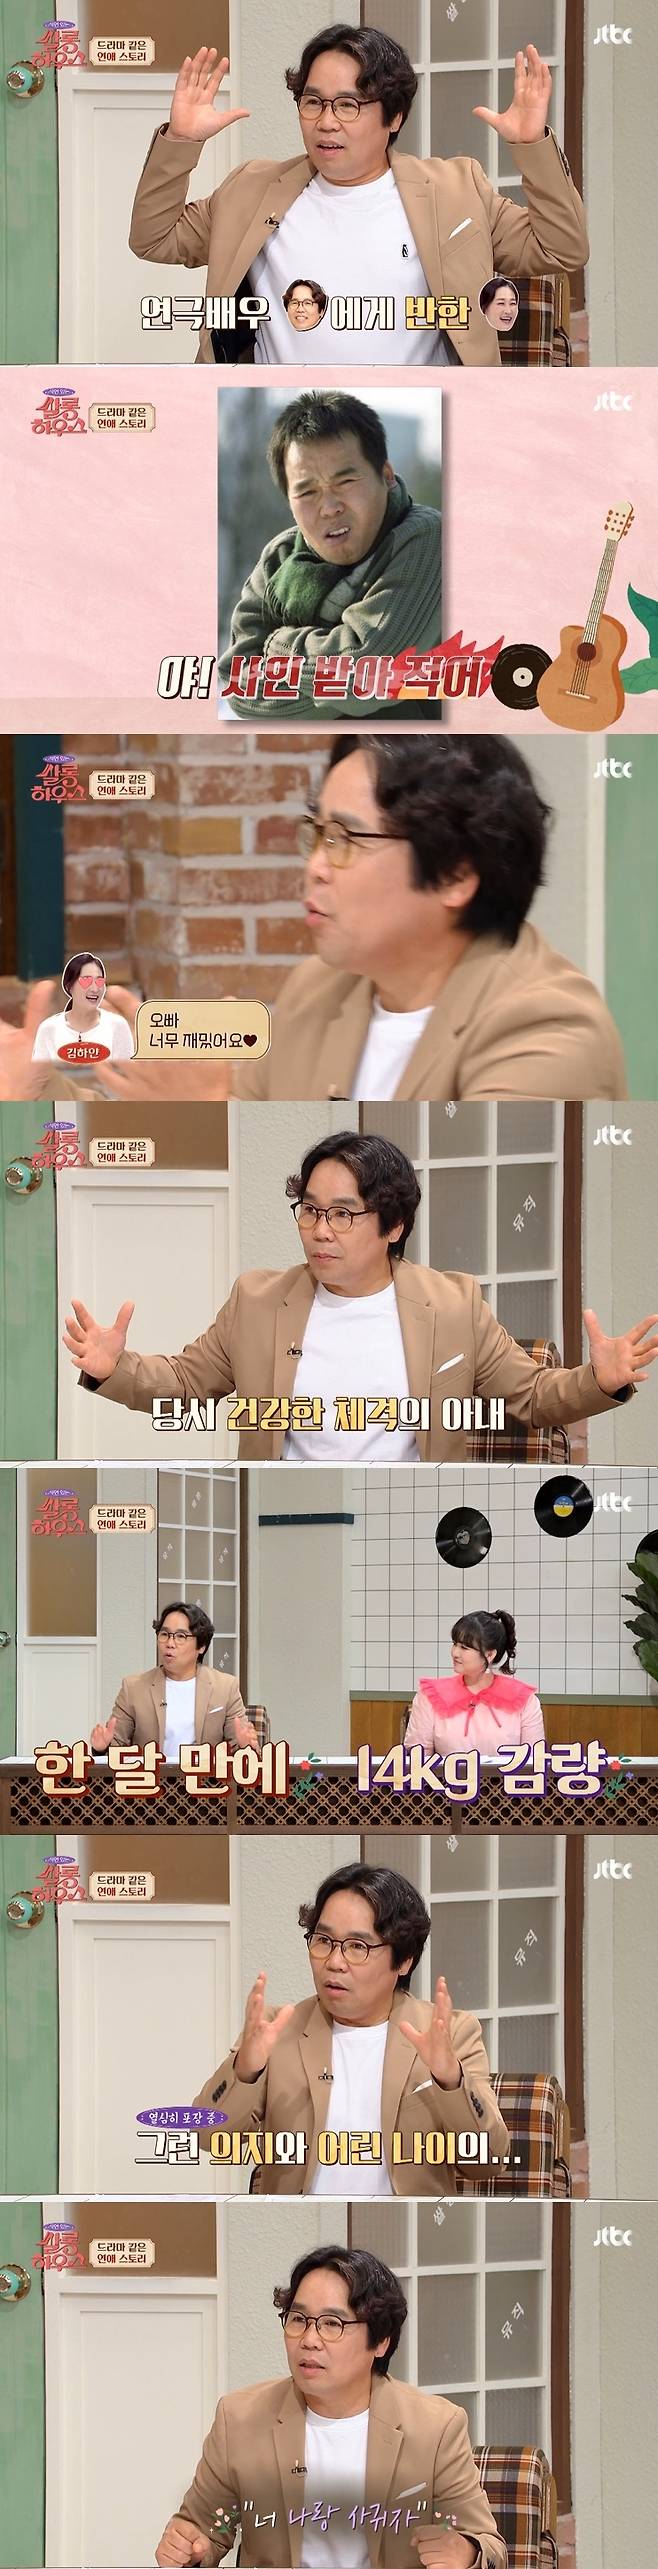 Mann marriage (ricelongs)Actor Jung Eun-pyo reveals dramatic love storyJTBC Story of the Rice House broadcasted on July 31 was featured as a representative parent of Dadong.3 Brother and Sister Dad Jung Eun-pyo appeared as a guest with 4 Brother and Sister mother Jung Mi Ae.MC Noh Sa-yeon asked, How did Jung Eun-pyo meet his wife? Jung Eun-pyo said, I played the play Barber Park Bong-gu during the 2002 World Cup.I appeared with Yoo Hae-jin and Oh Jeong-se.Jung Eun-pyo said, When I appeared on stage, a halo was shining. My wife was waiting for me with my friends after the performance.My wife asked me to sign it, but I was so tired and I didnt like it. I was so upset that I said, Hey! Write down your autograph.But my wife, who is receiving it as fun, joined a fan group and expressed interest in me. Jung Eun-pyo said, My wife was healthy and she was on a diet. She lost 10kg and promised to make a wish.I was so pretty because I lost weight, she confessed.Noh Sa-yeon jokingly asked, Did you think your wife did not like it at first? and Jung Eun-pyo joked, Yes.Jung Eun-pyo said: I accepted it because I said Lets go out with me, 100 Days since weve been together.I was marriage in the first place, he added.